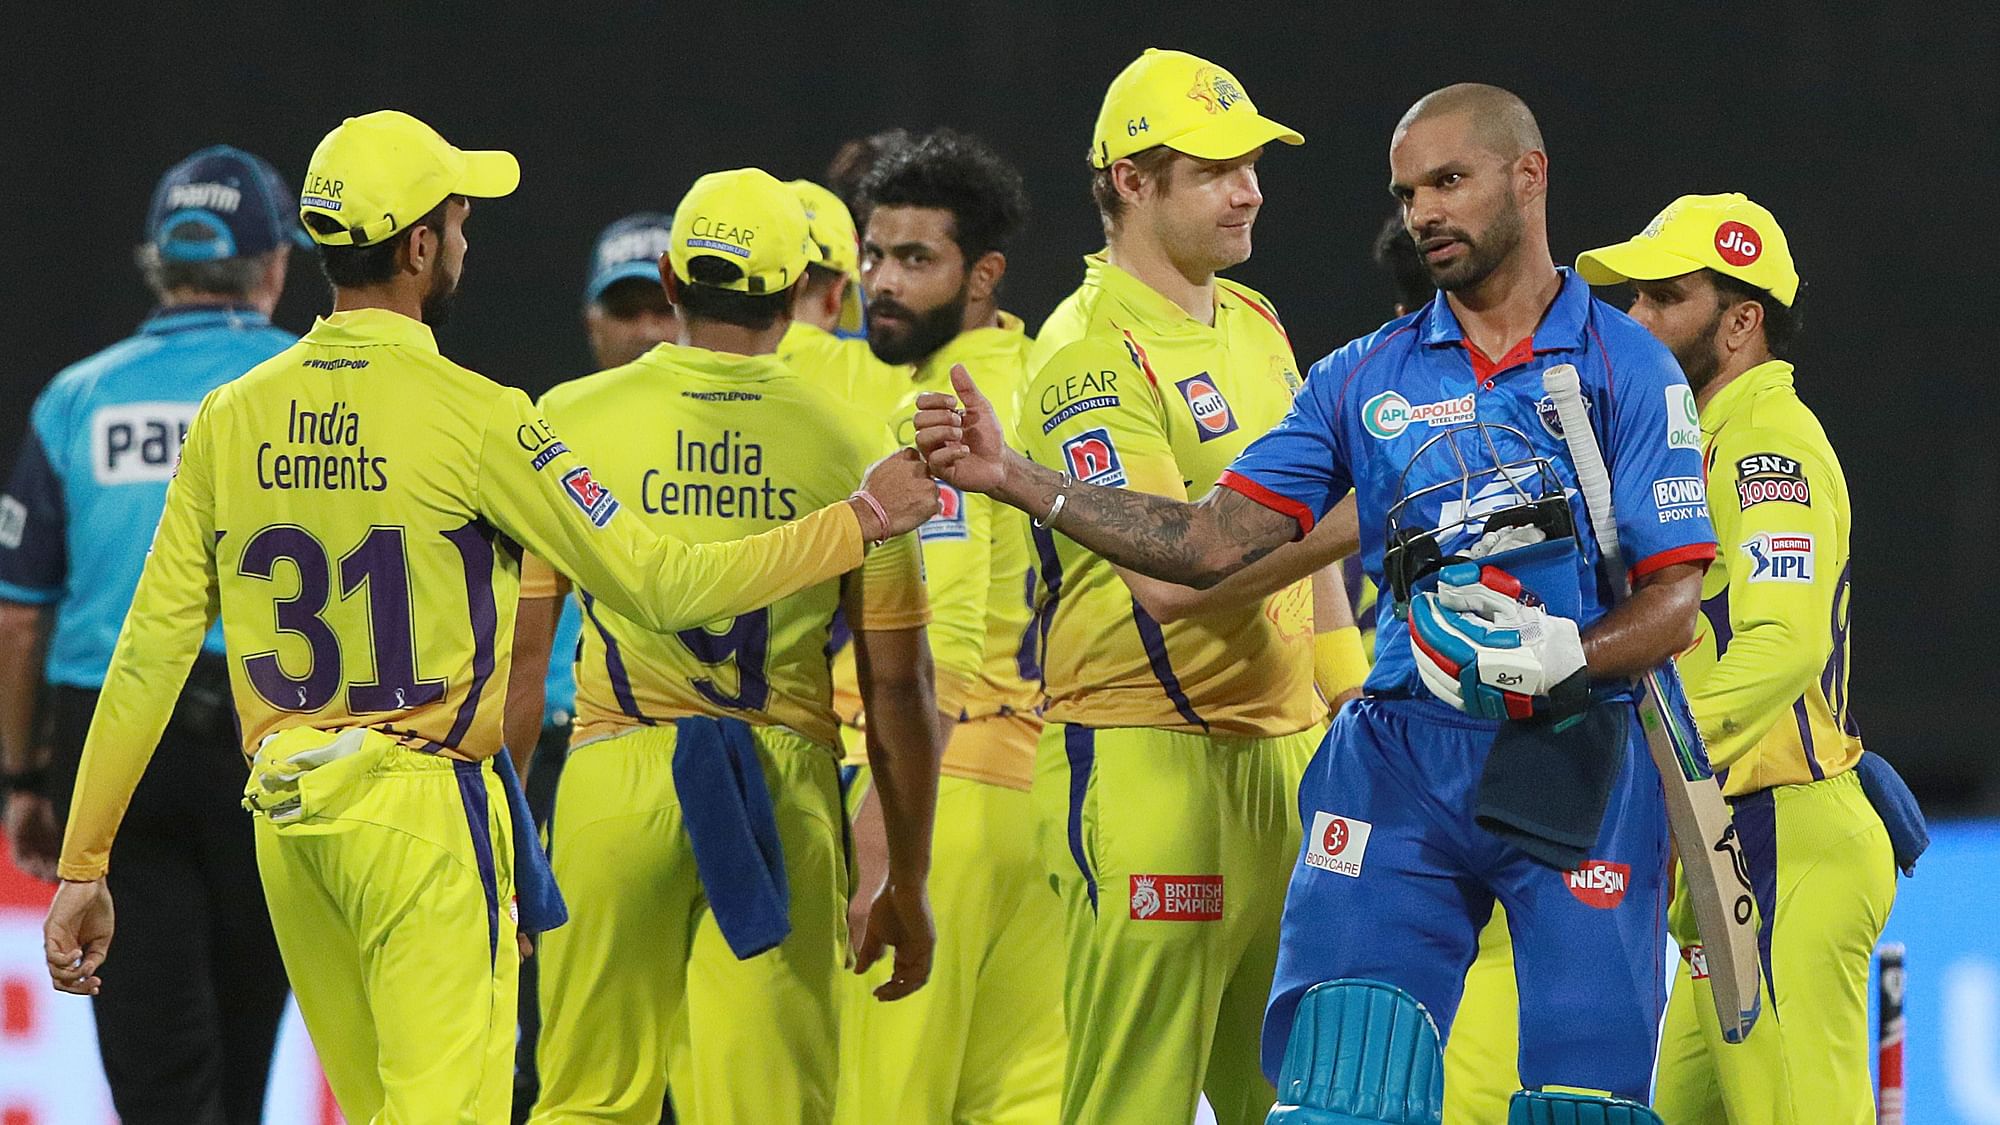 IPL 2020 Points Table DC Back on Top, CSK, RR and RCB Remain Unchanged